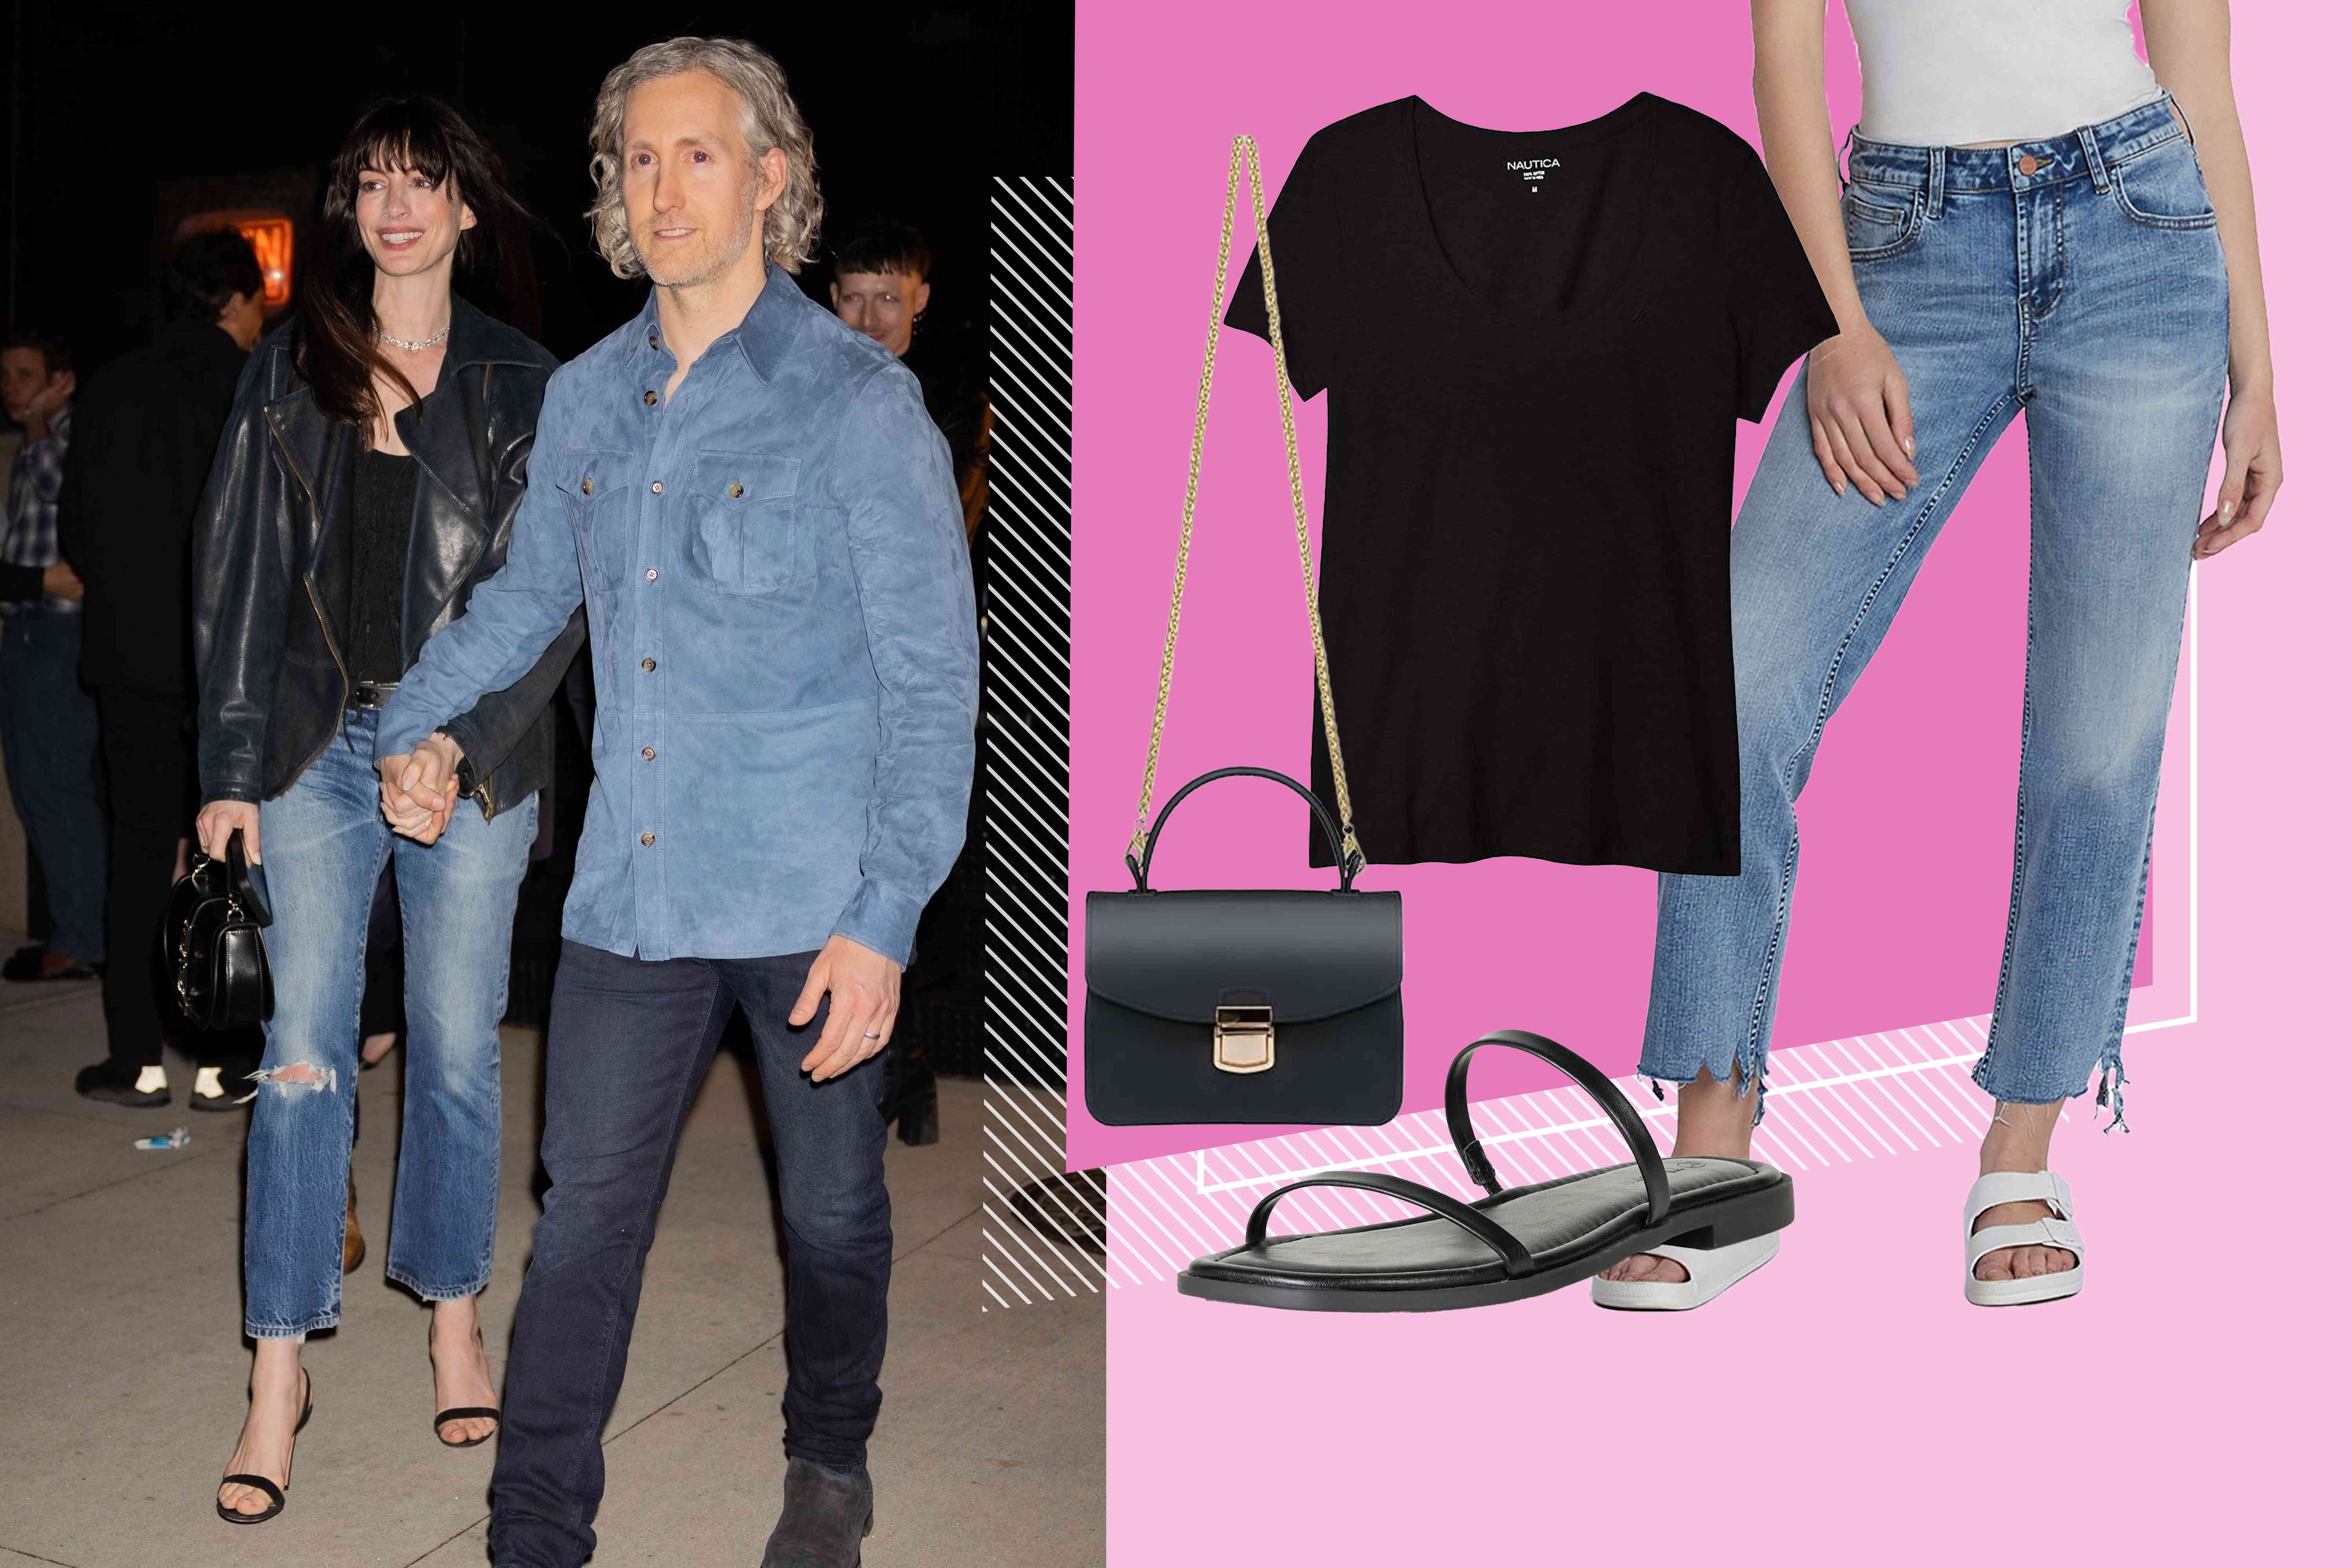 Anne Hathaway’s Cropped Jeans and Strappy Sandals Are the Right Idea for Simple Spring Outfits — Get the Look from $15